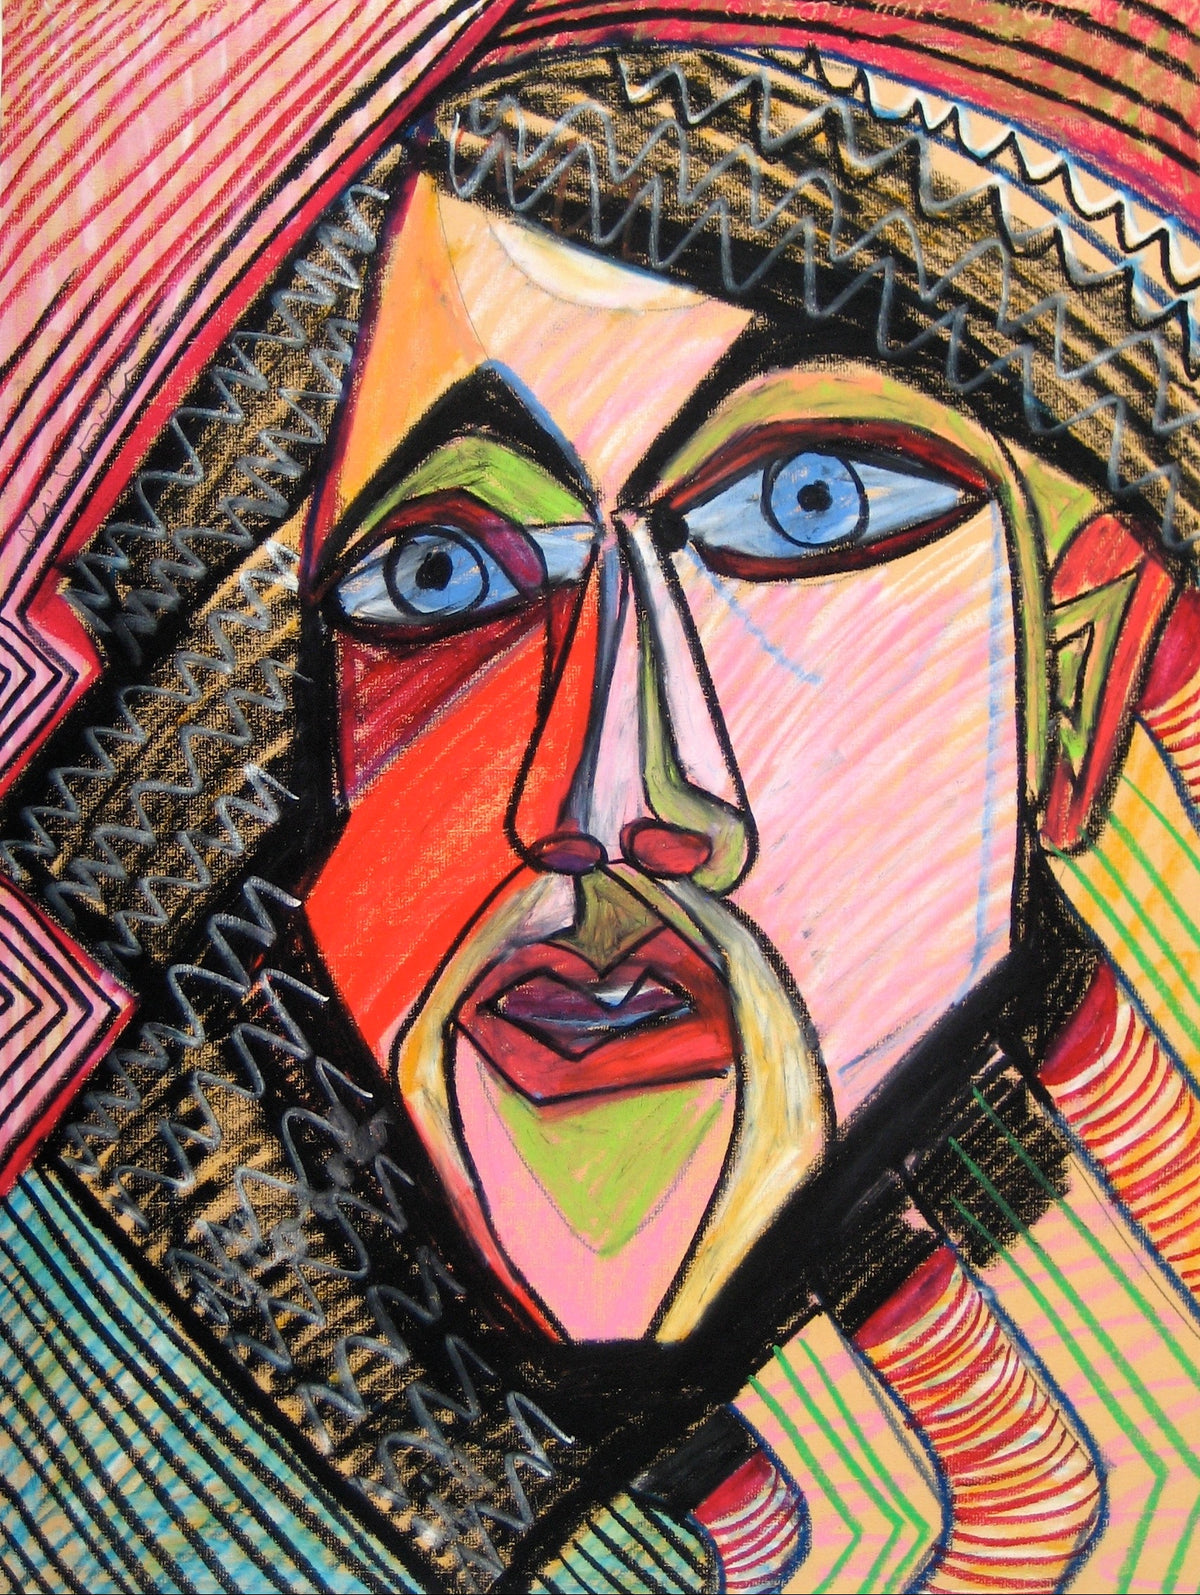 Bright Psychedelic Geometric Surreal Portrait &lt;br&gt;Mid to Late 20th Century Pastel &lt;br&gt;&lt;br&gt;#16445